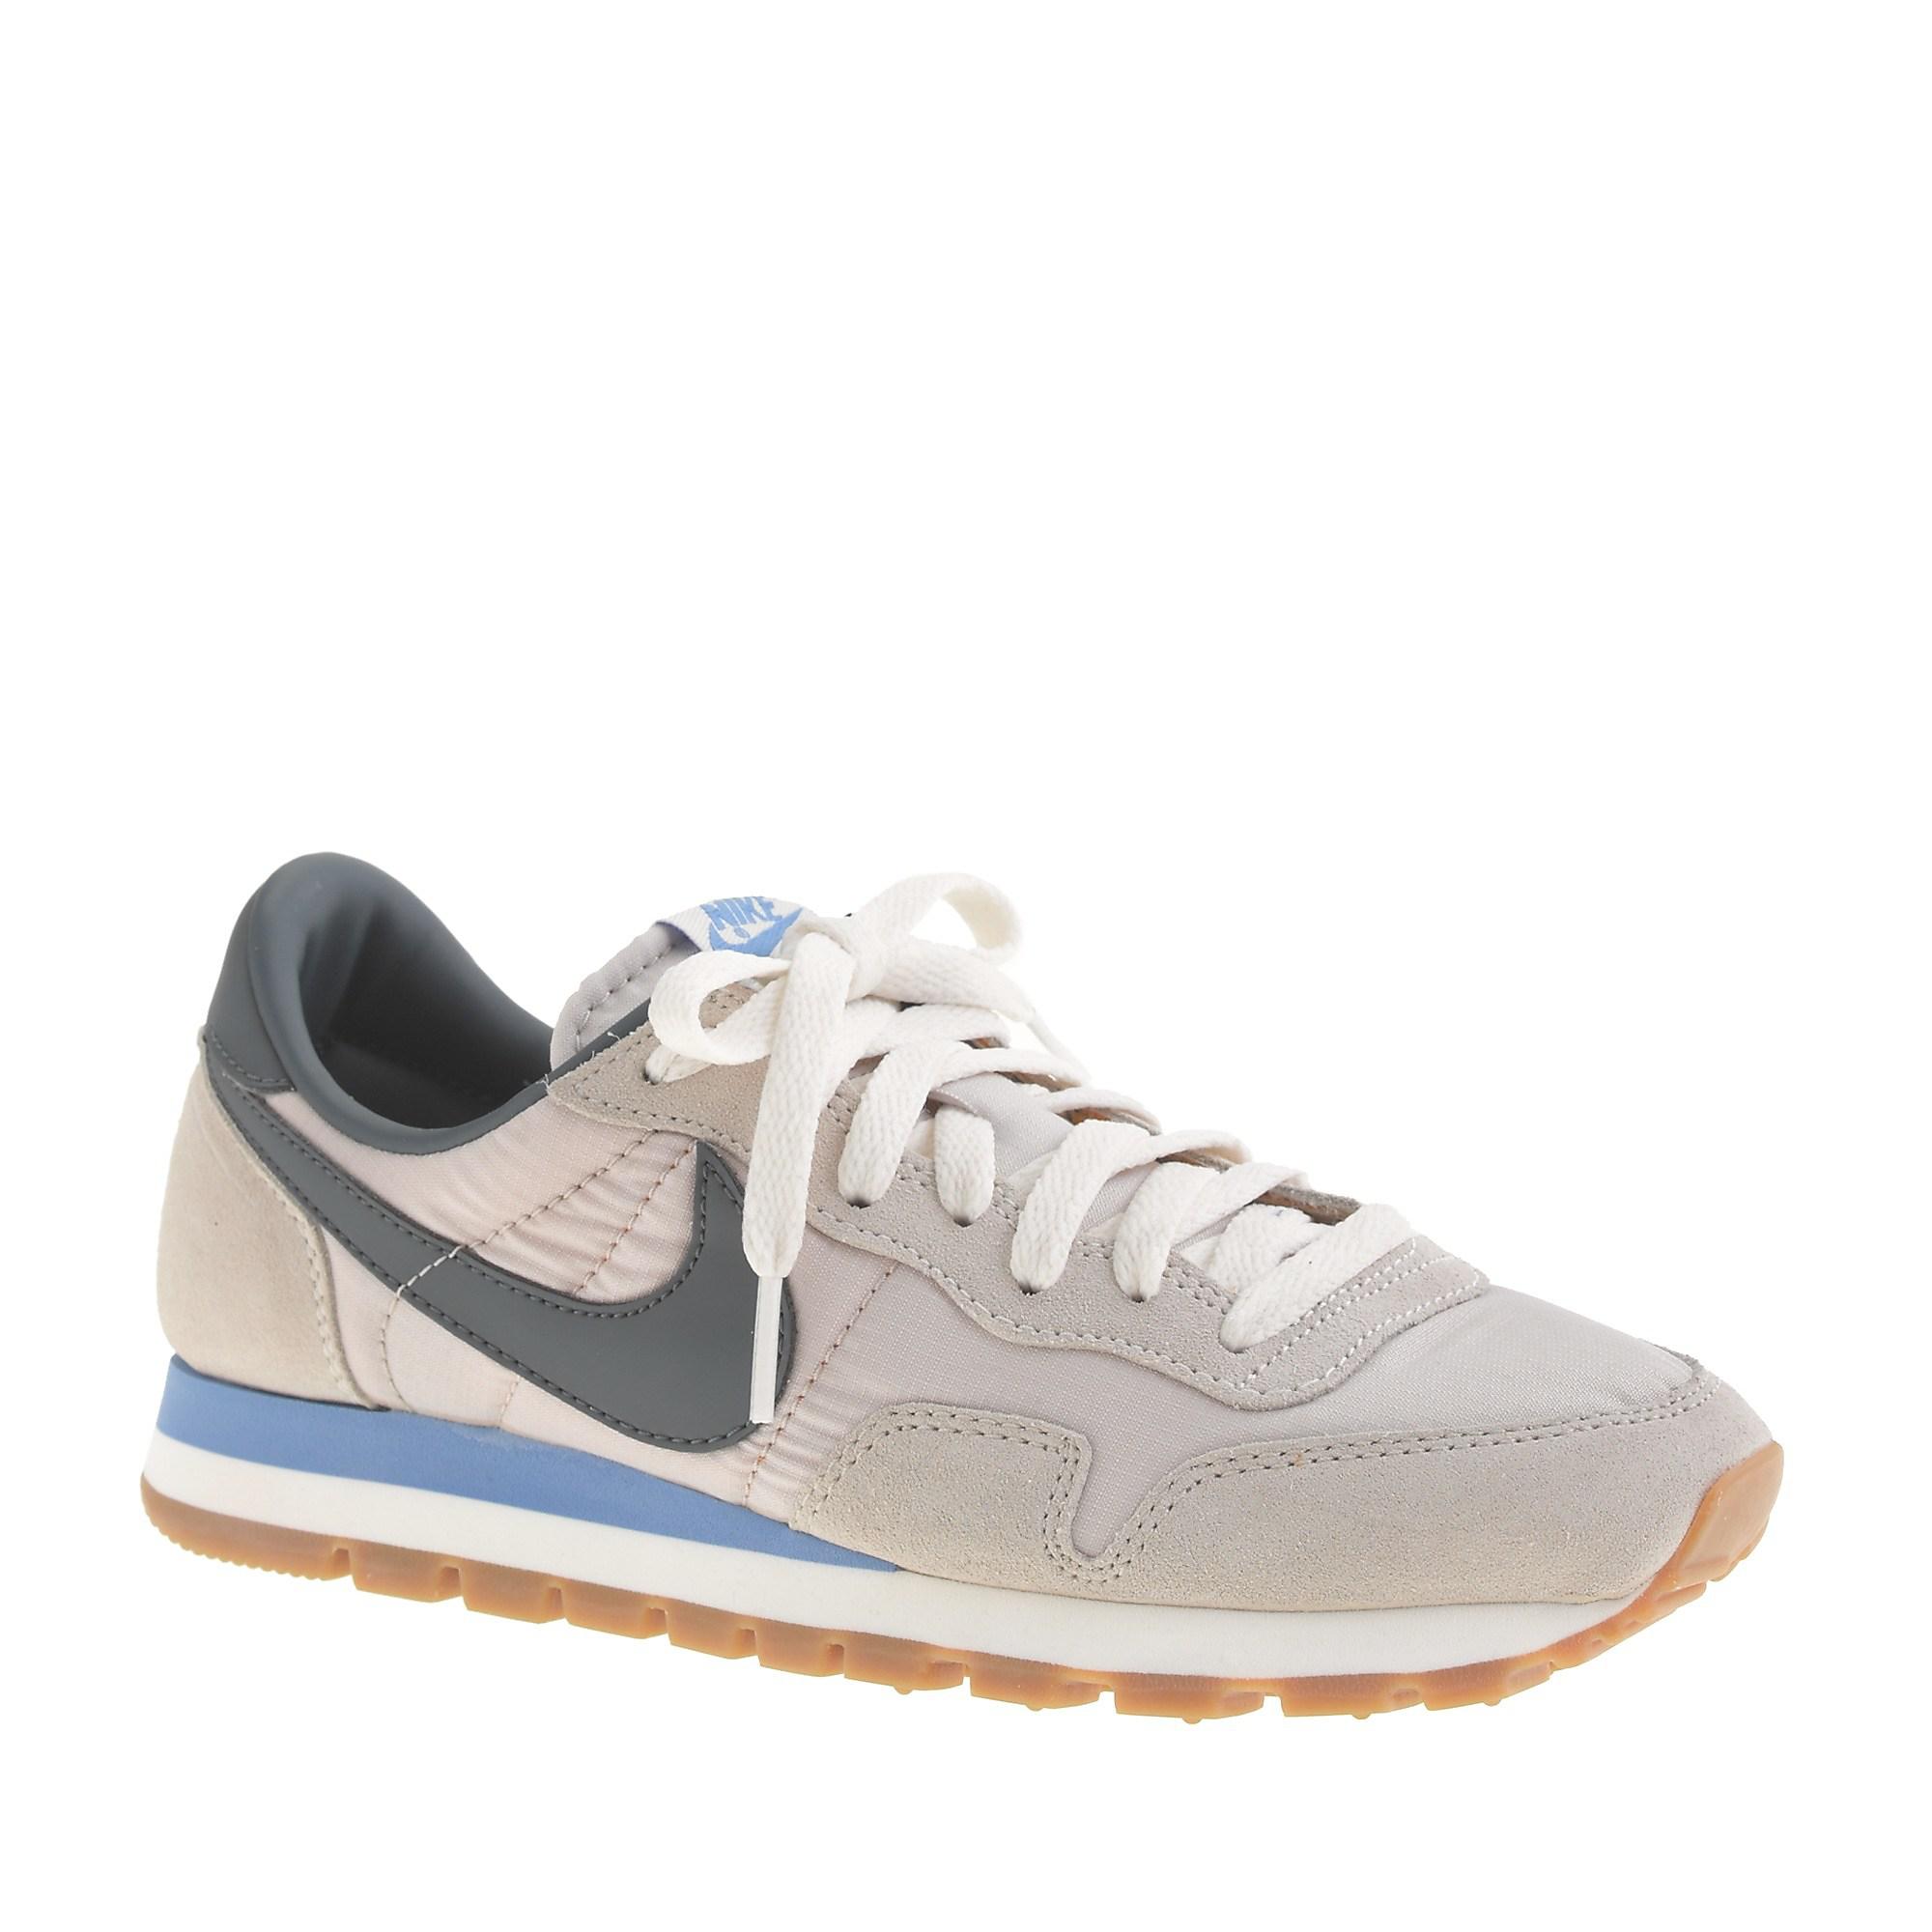 J.Crew Women's Nike Vintage Collection Pegasus '83 Sneakers in Gray | Lyst